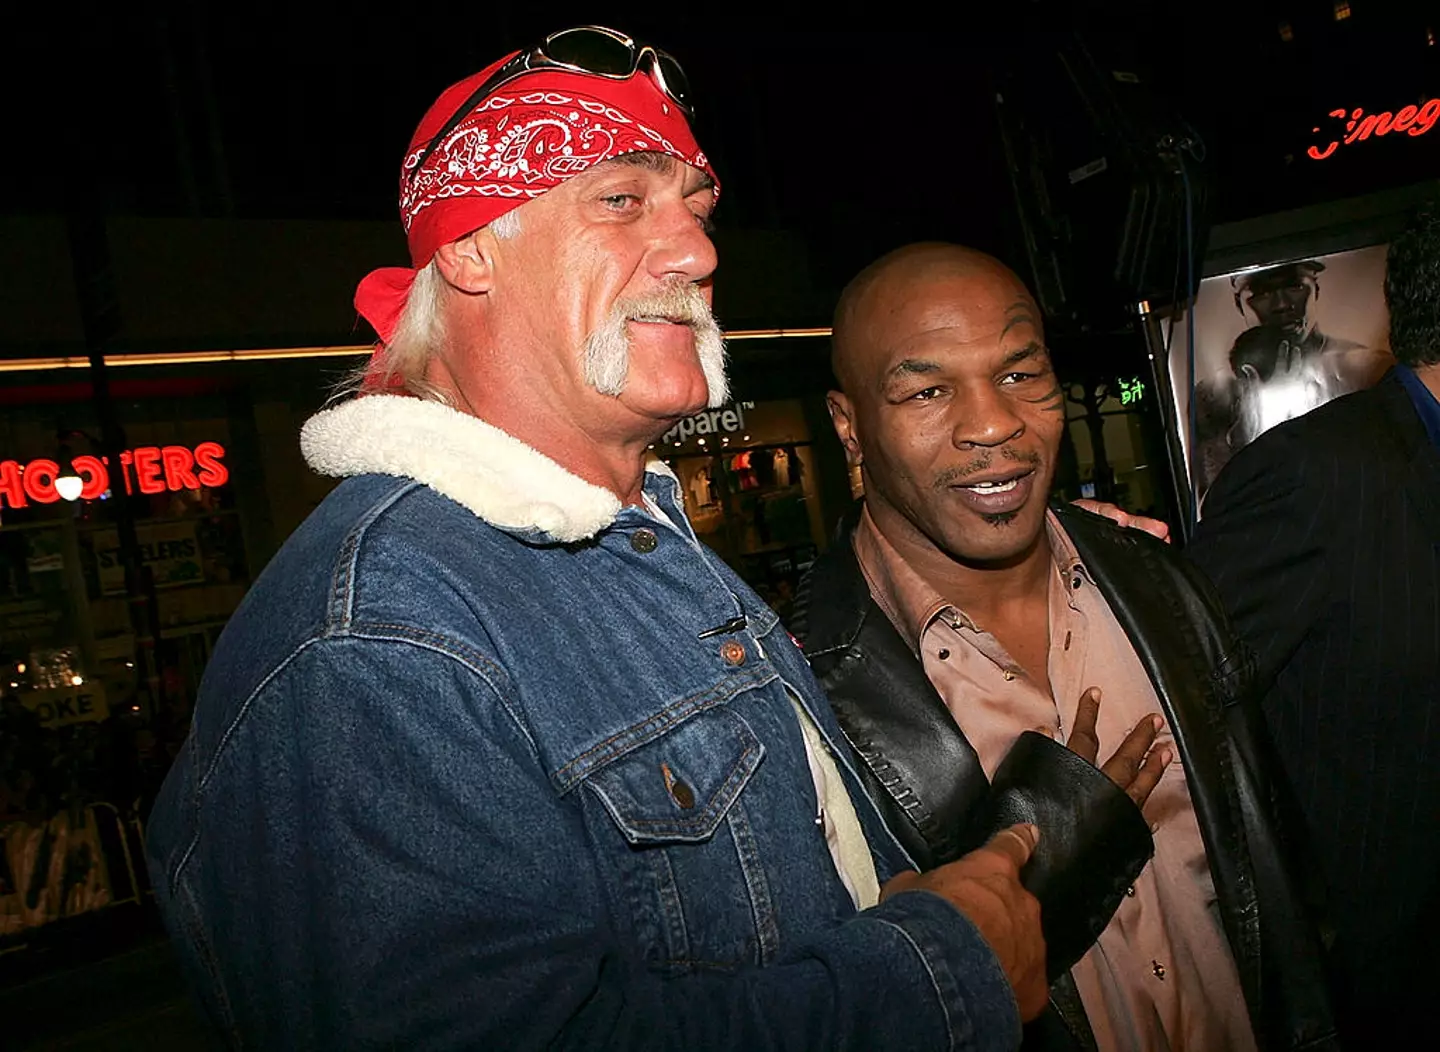 Hulk Hogan has given his thoughts on the fight (Image: Getty)